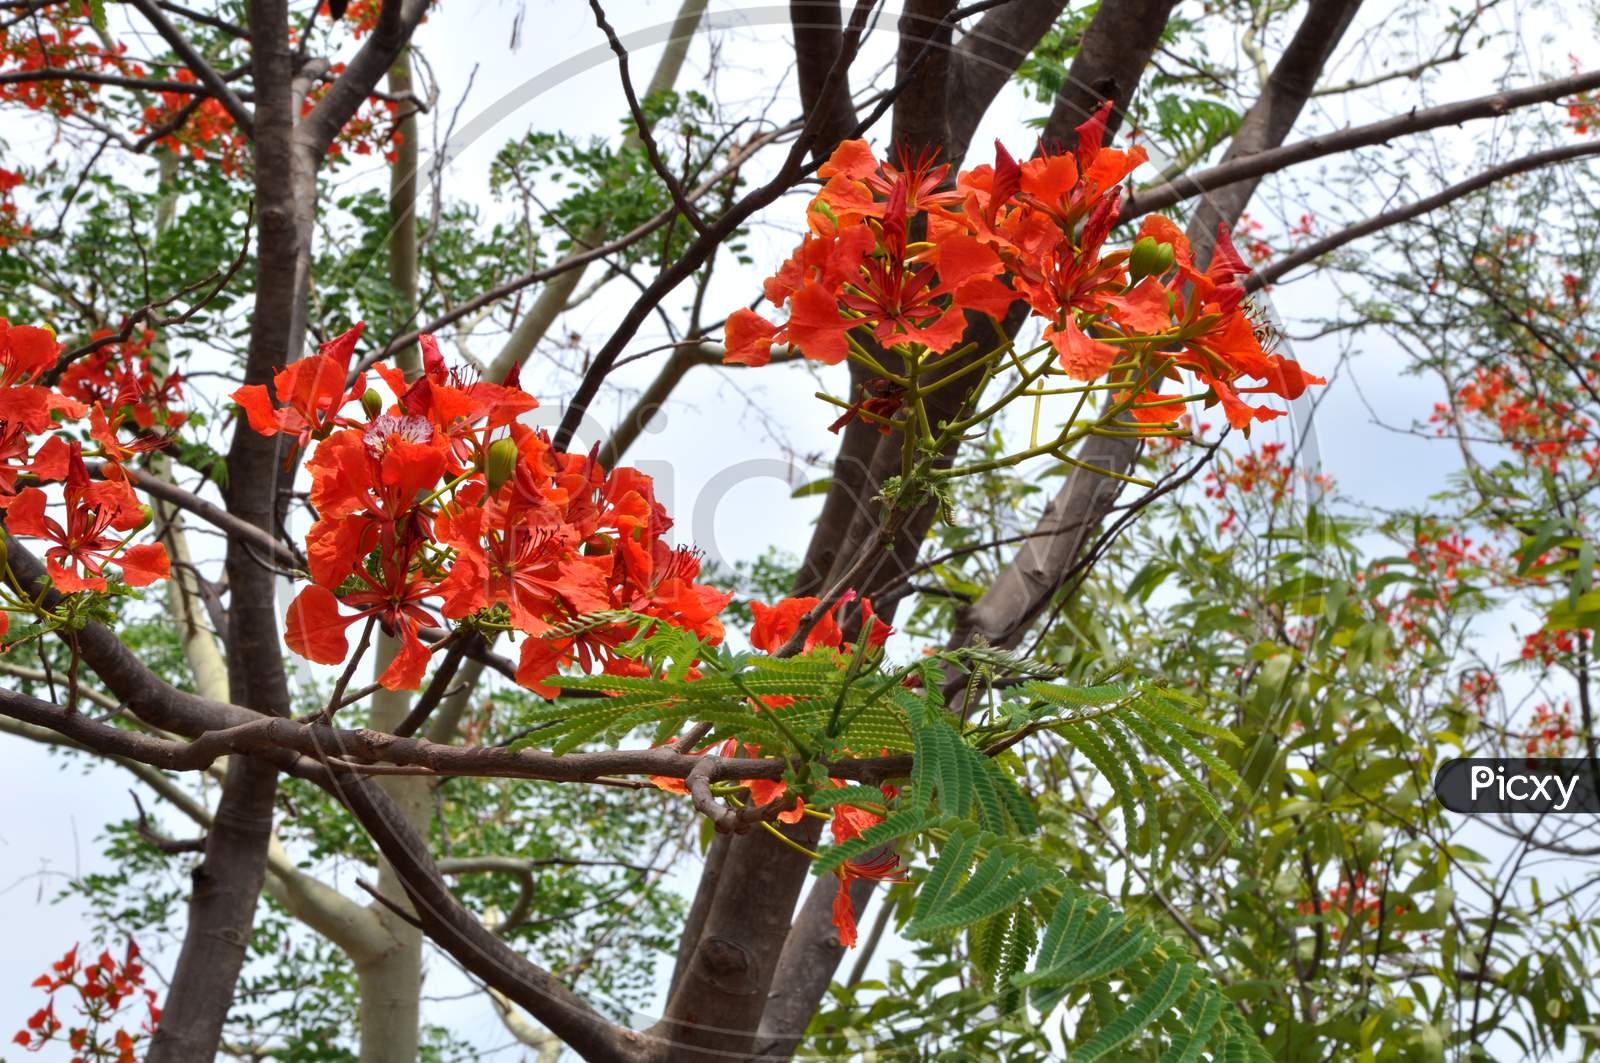 A Beautiful Tree Carrying Beautiful Red Flowers On It.